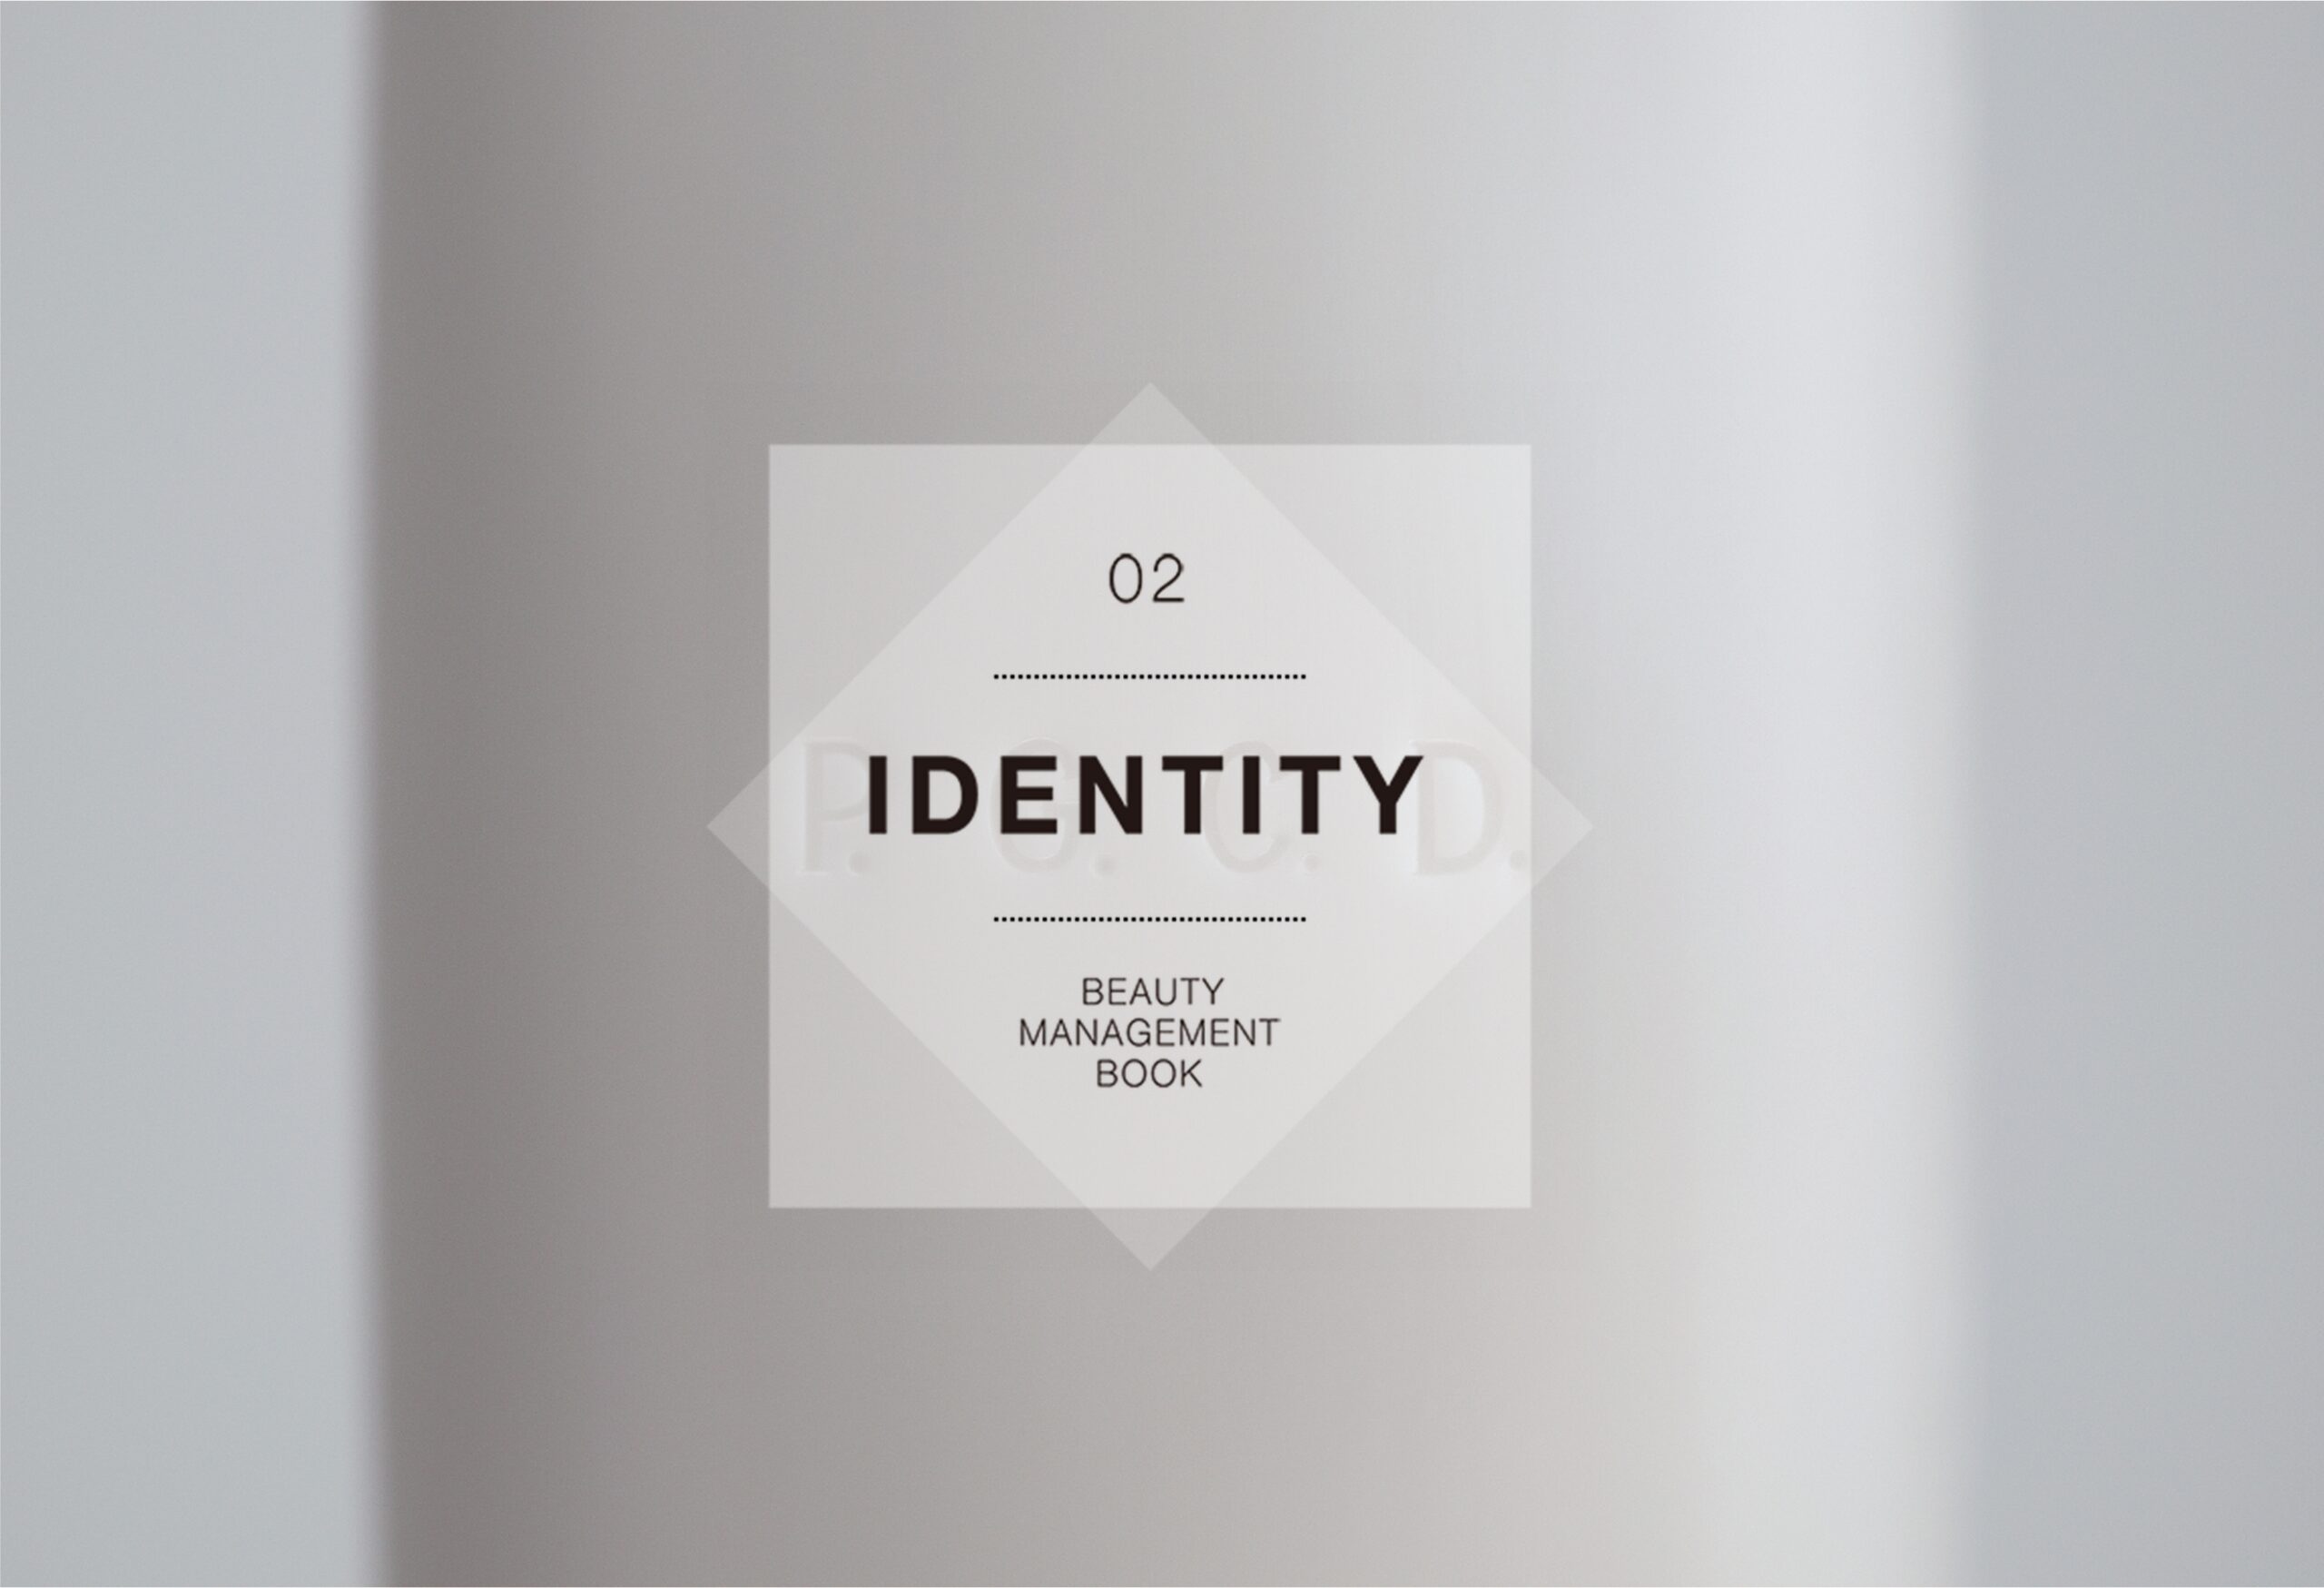 Beauty Management Book 02 IDENTITY Why make it?  P.G.C.D.Tells the soap.